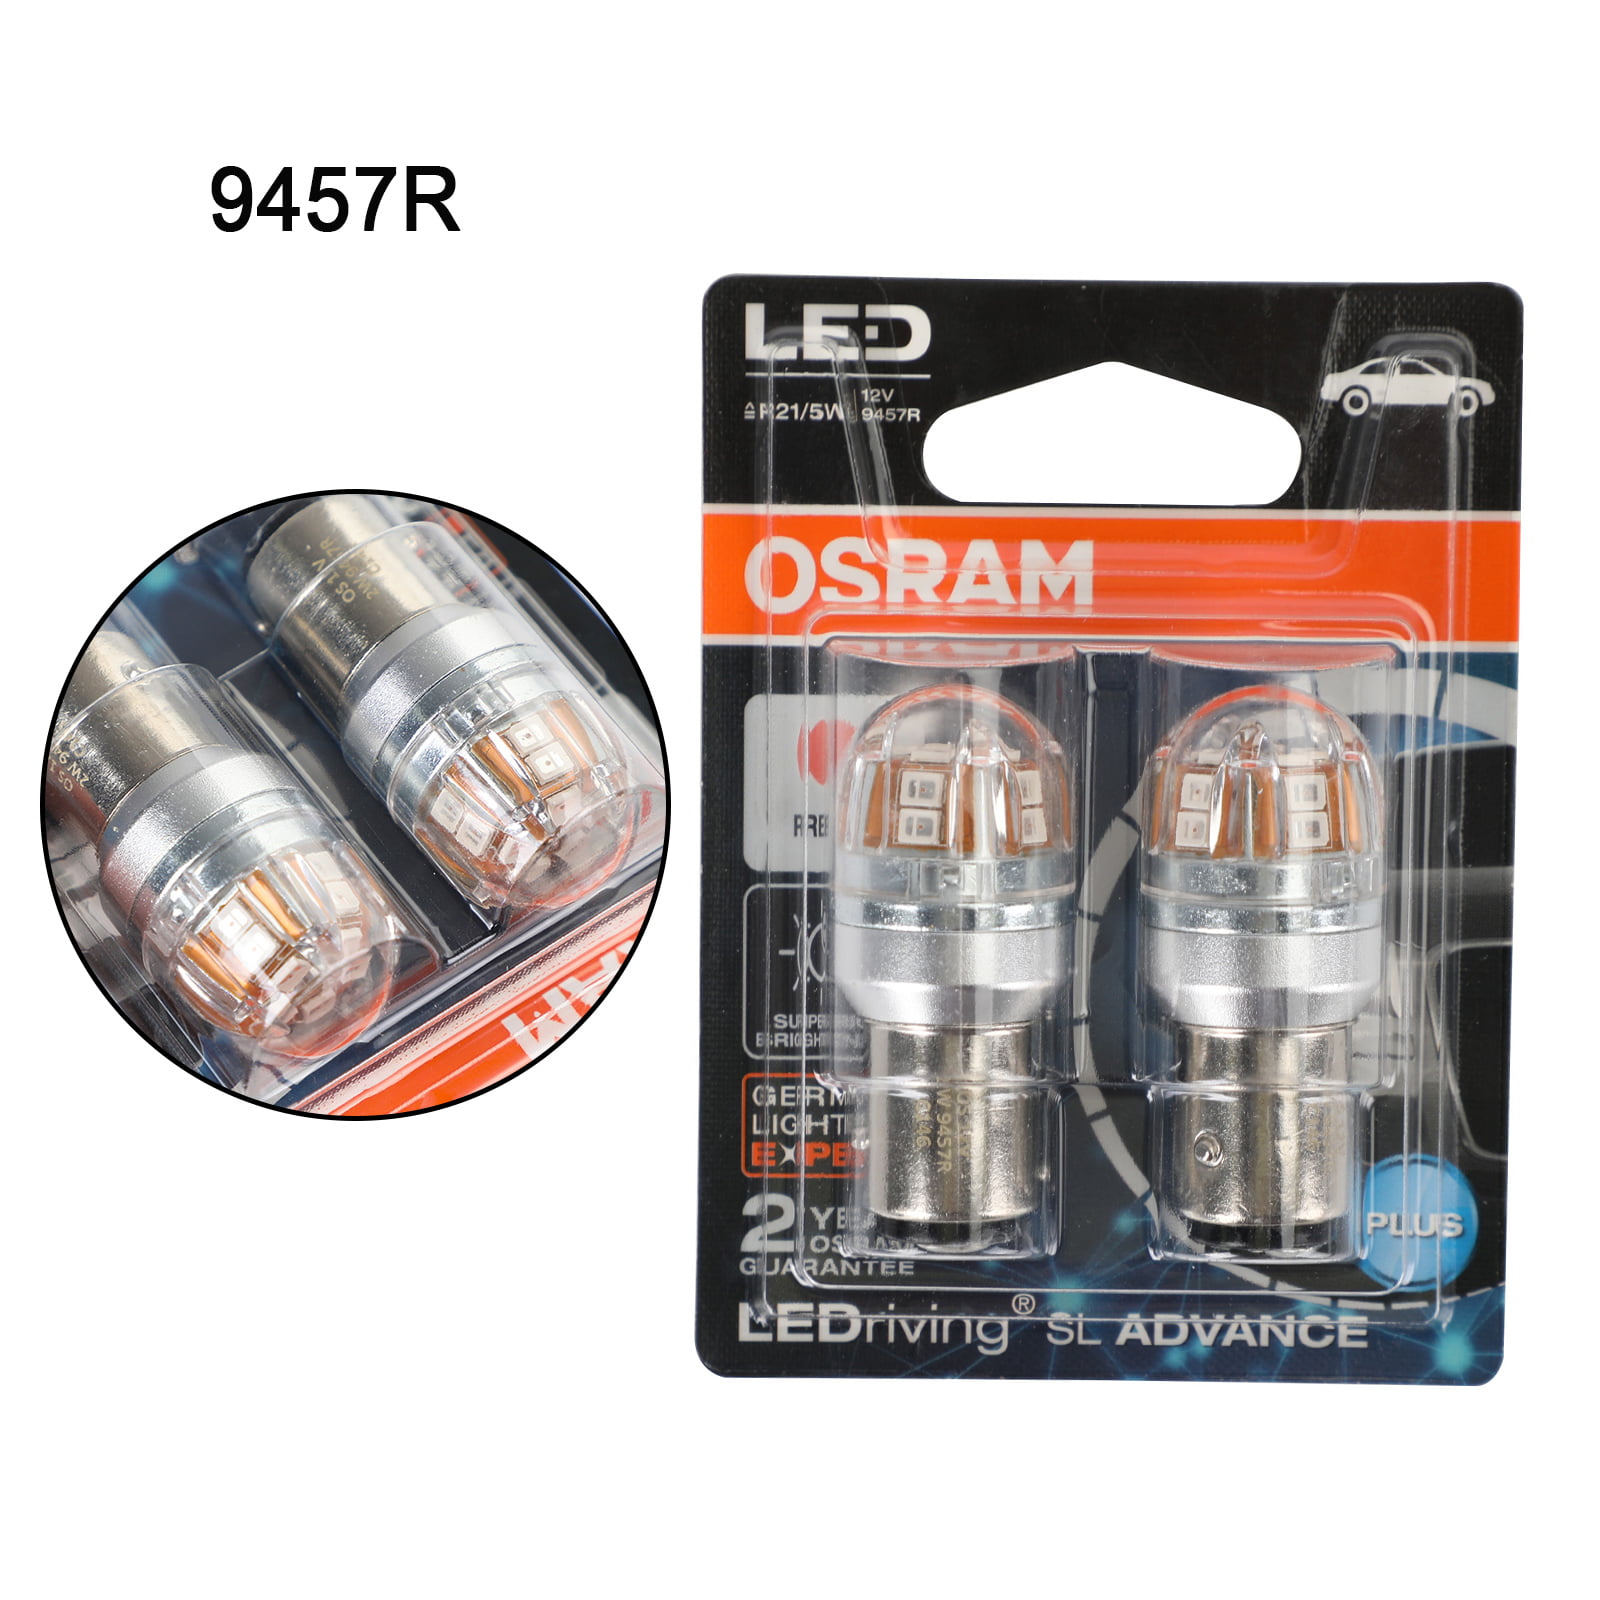 Planet Equivalent Relative size 2x For OSRAM 9457R Car Auxiliary Bulbs LED P21/5W 12V 2/0.2W BAY15d -  Walmart.com